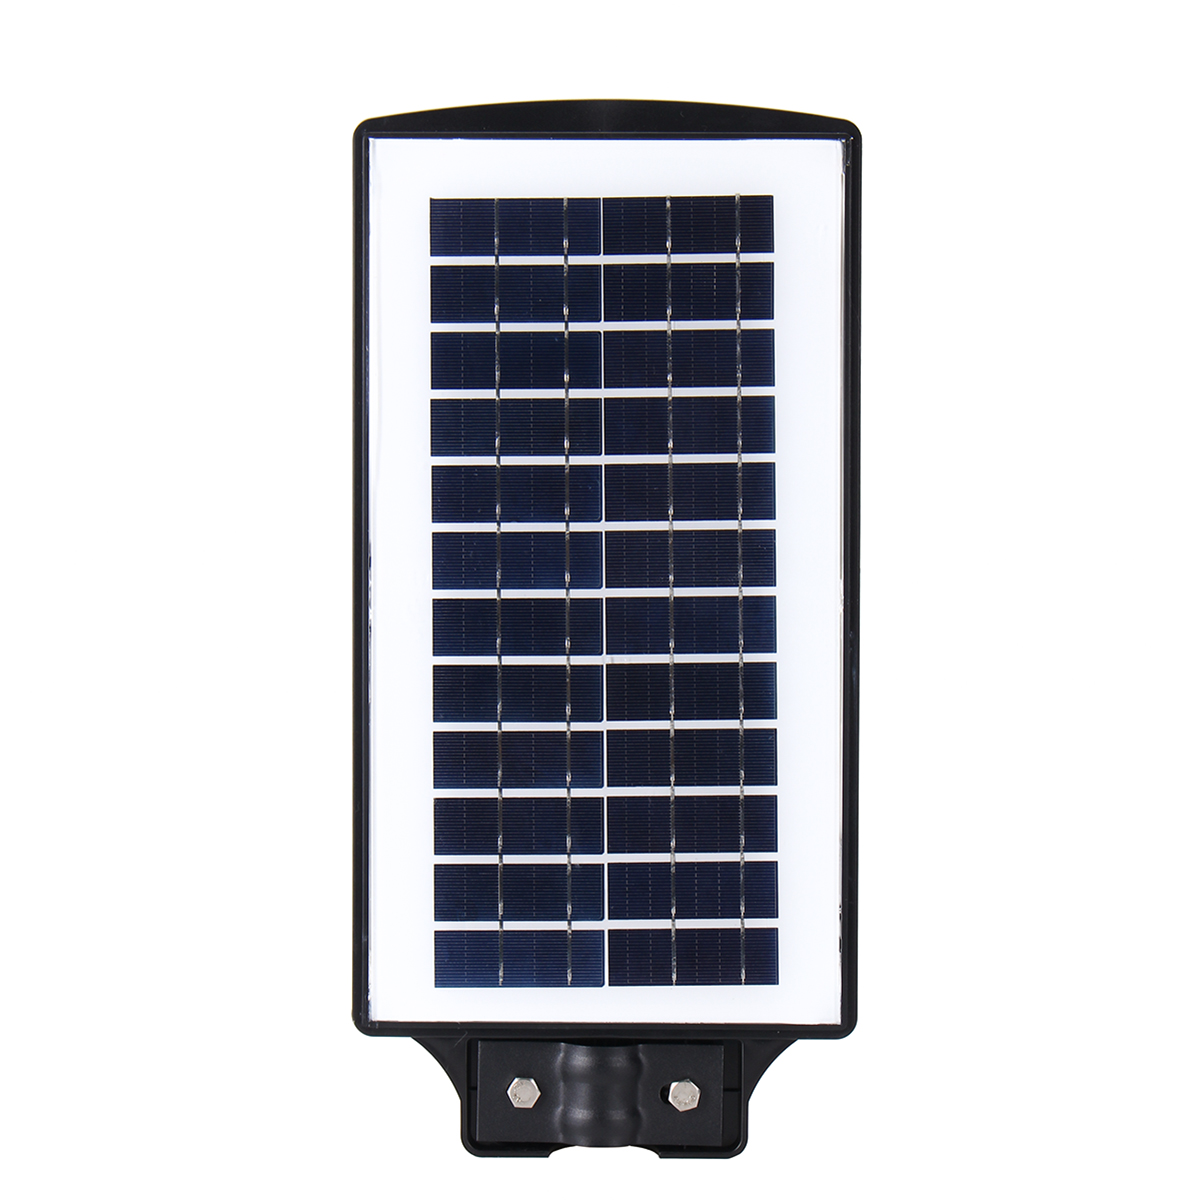 2347CM-Waterproof-80-LED-Solar-Street-Light-120-Degree-With-Remote-Control-1622330-2